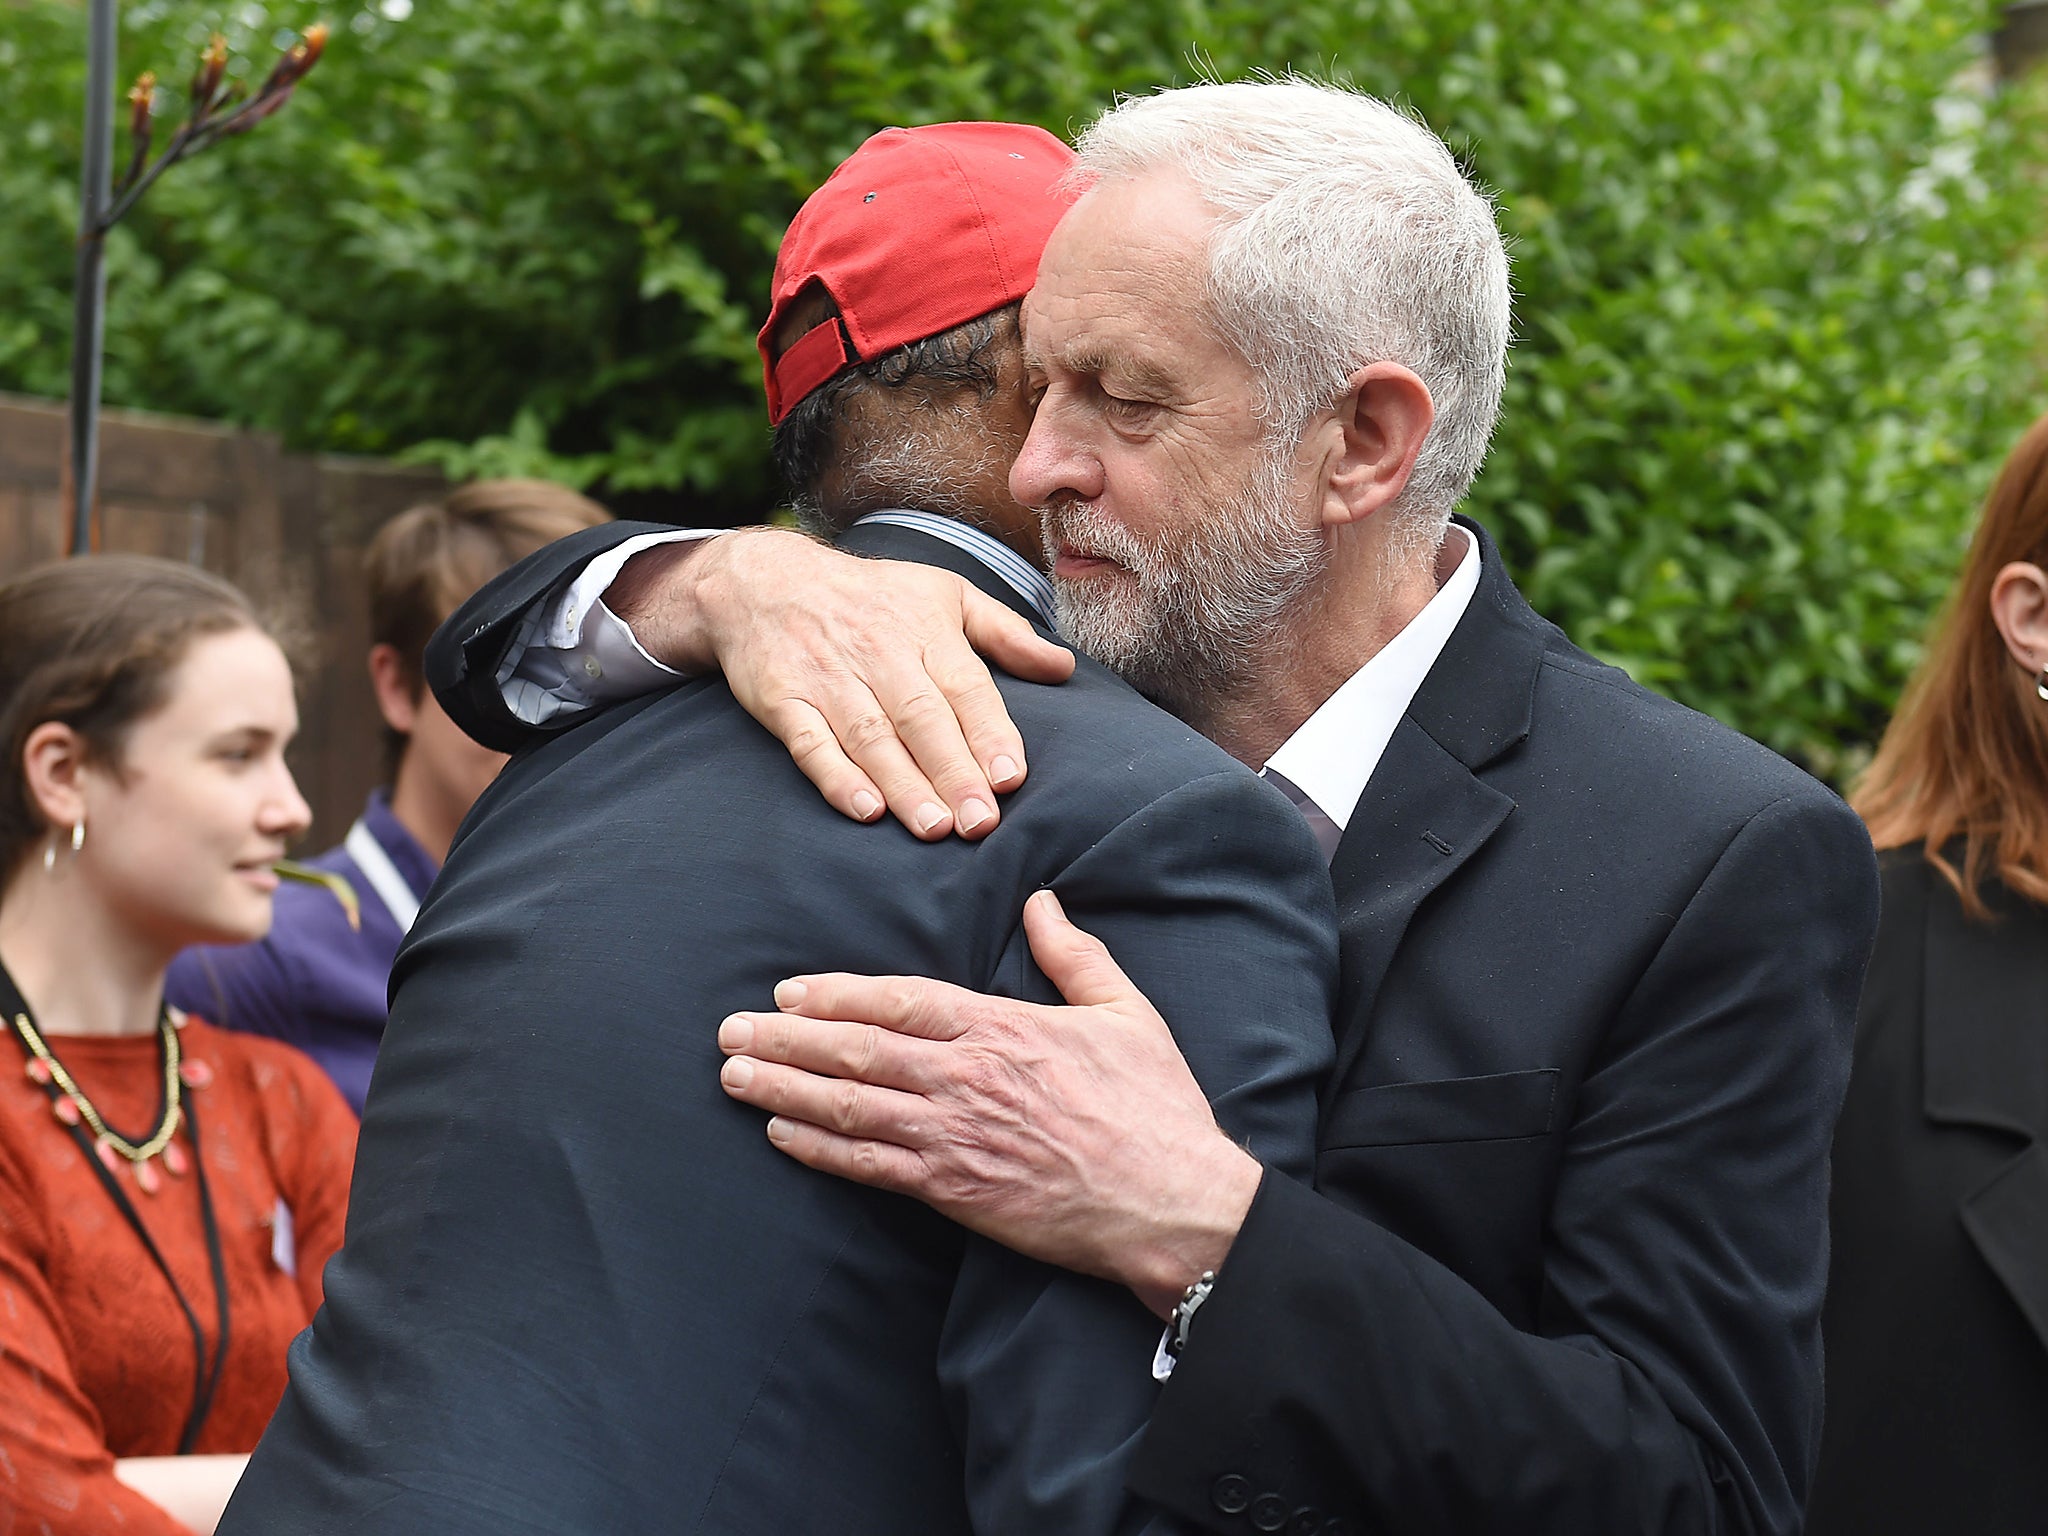 Labour leader Jeremy Corbyn hugs councillor Mushtaq Lasharie as he arrives at St Clement's Church in Latimer Road, where volunteers have provided shelter and support for people affected by the fire at Grenfell Tower (Getty)